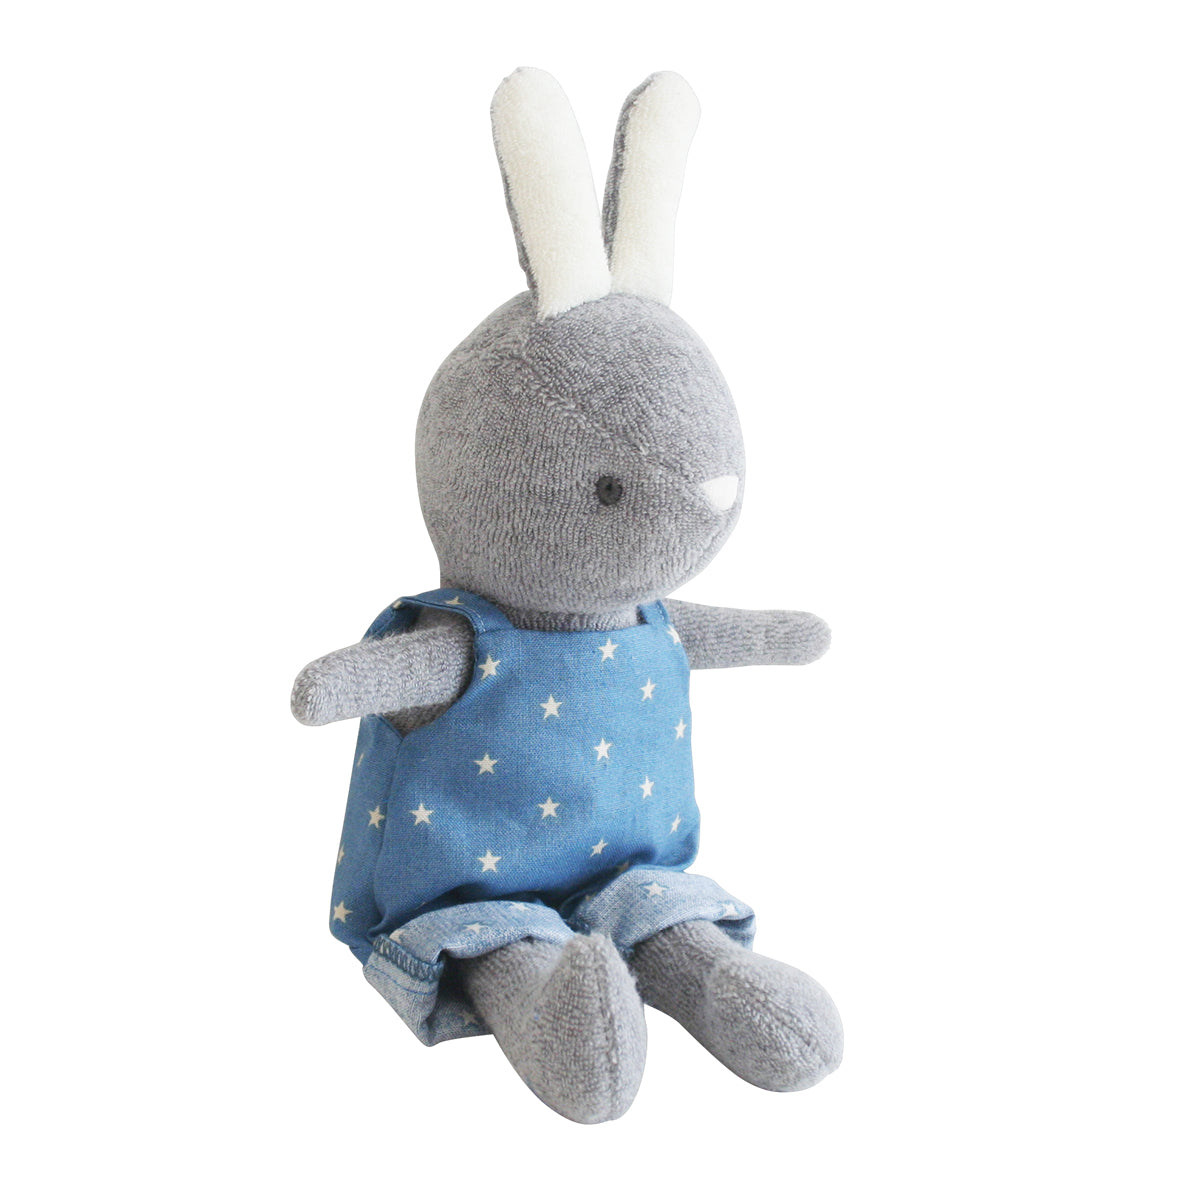 Baby Benny Bunny is possibly the cutest little bunny you ever did see. Made from a soft terry towelling fabric and wearing tiny overalls he makes the sweetest little bunny companion for your little one. Suitable from 3 years